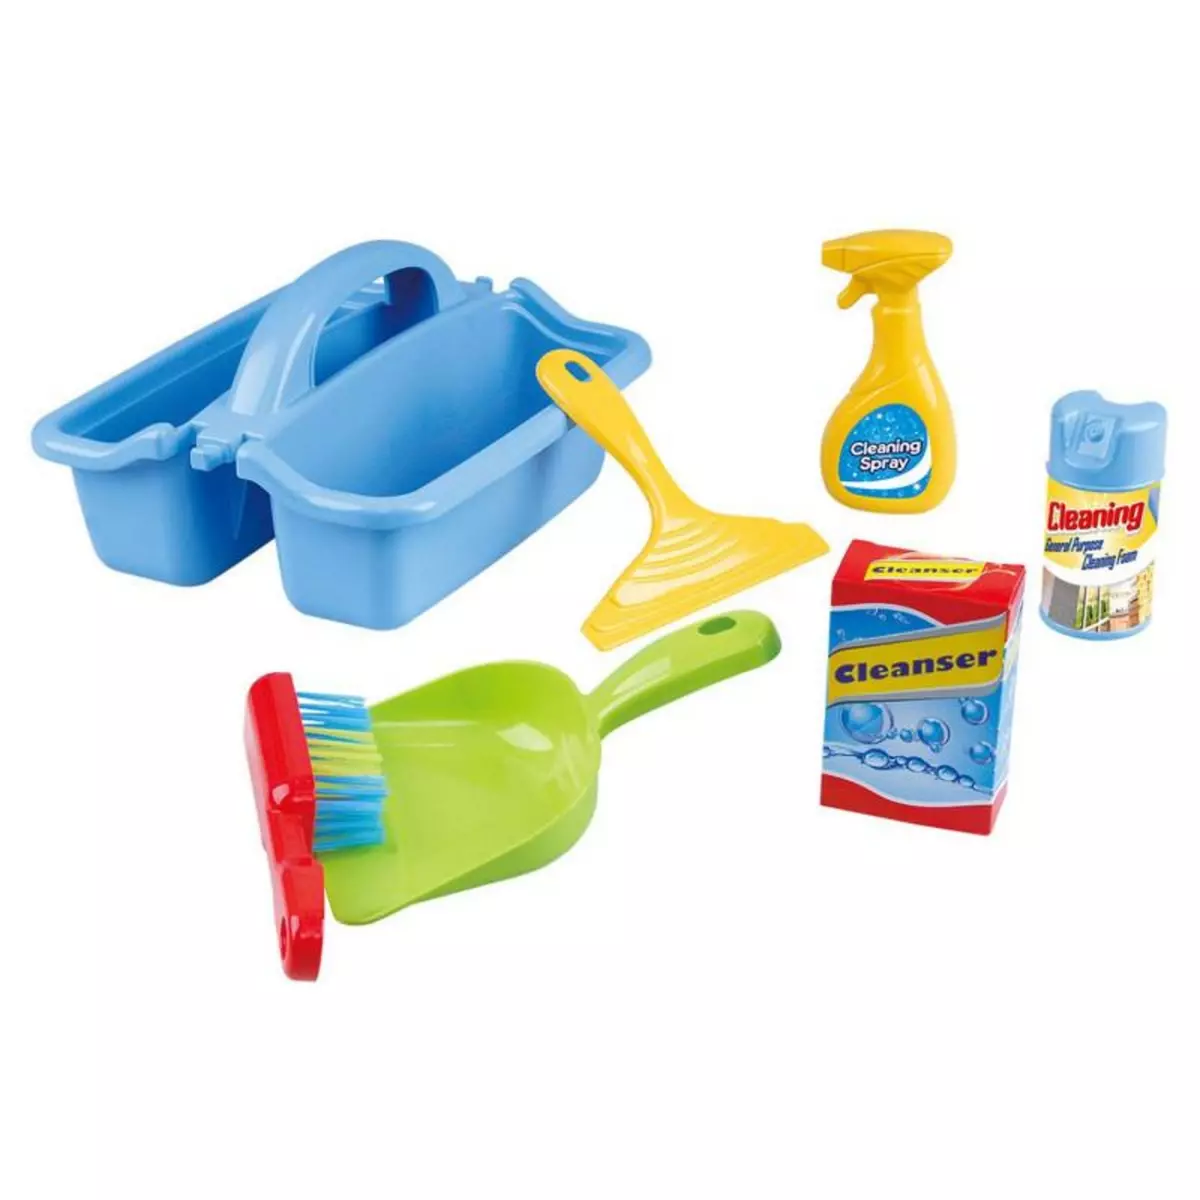 PLAYGO Playgo Cleaning set, 7 pcs.